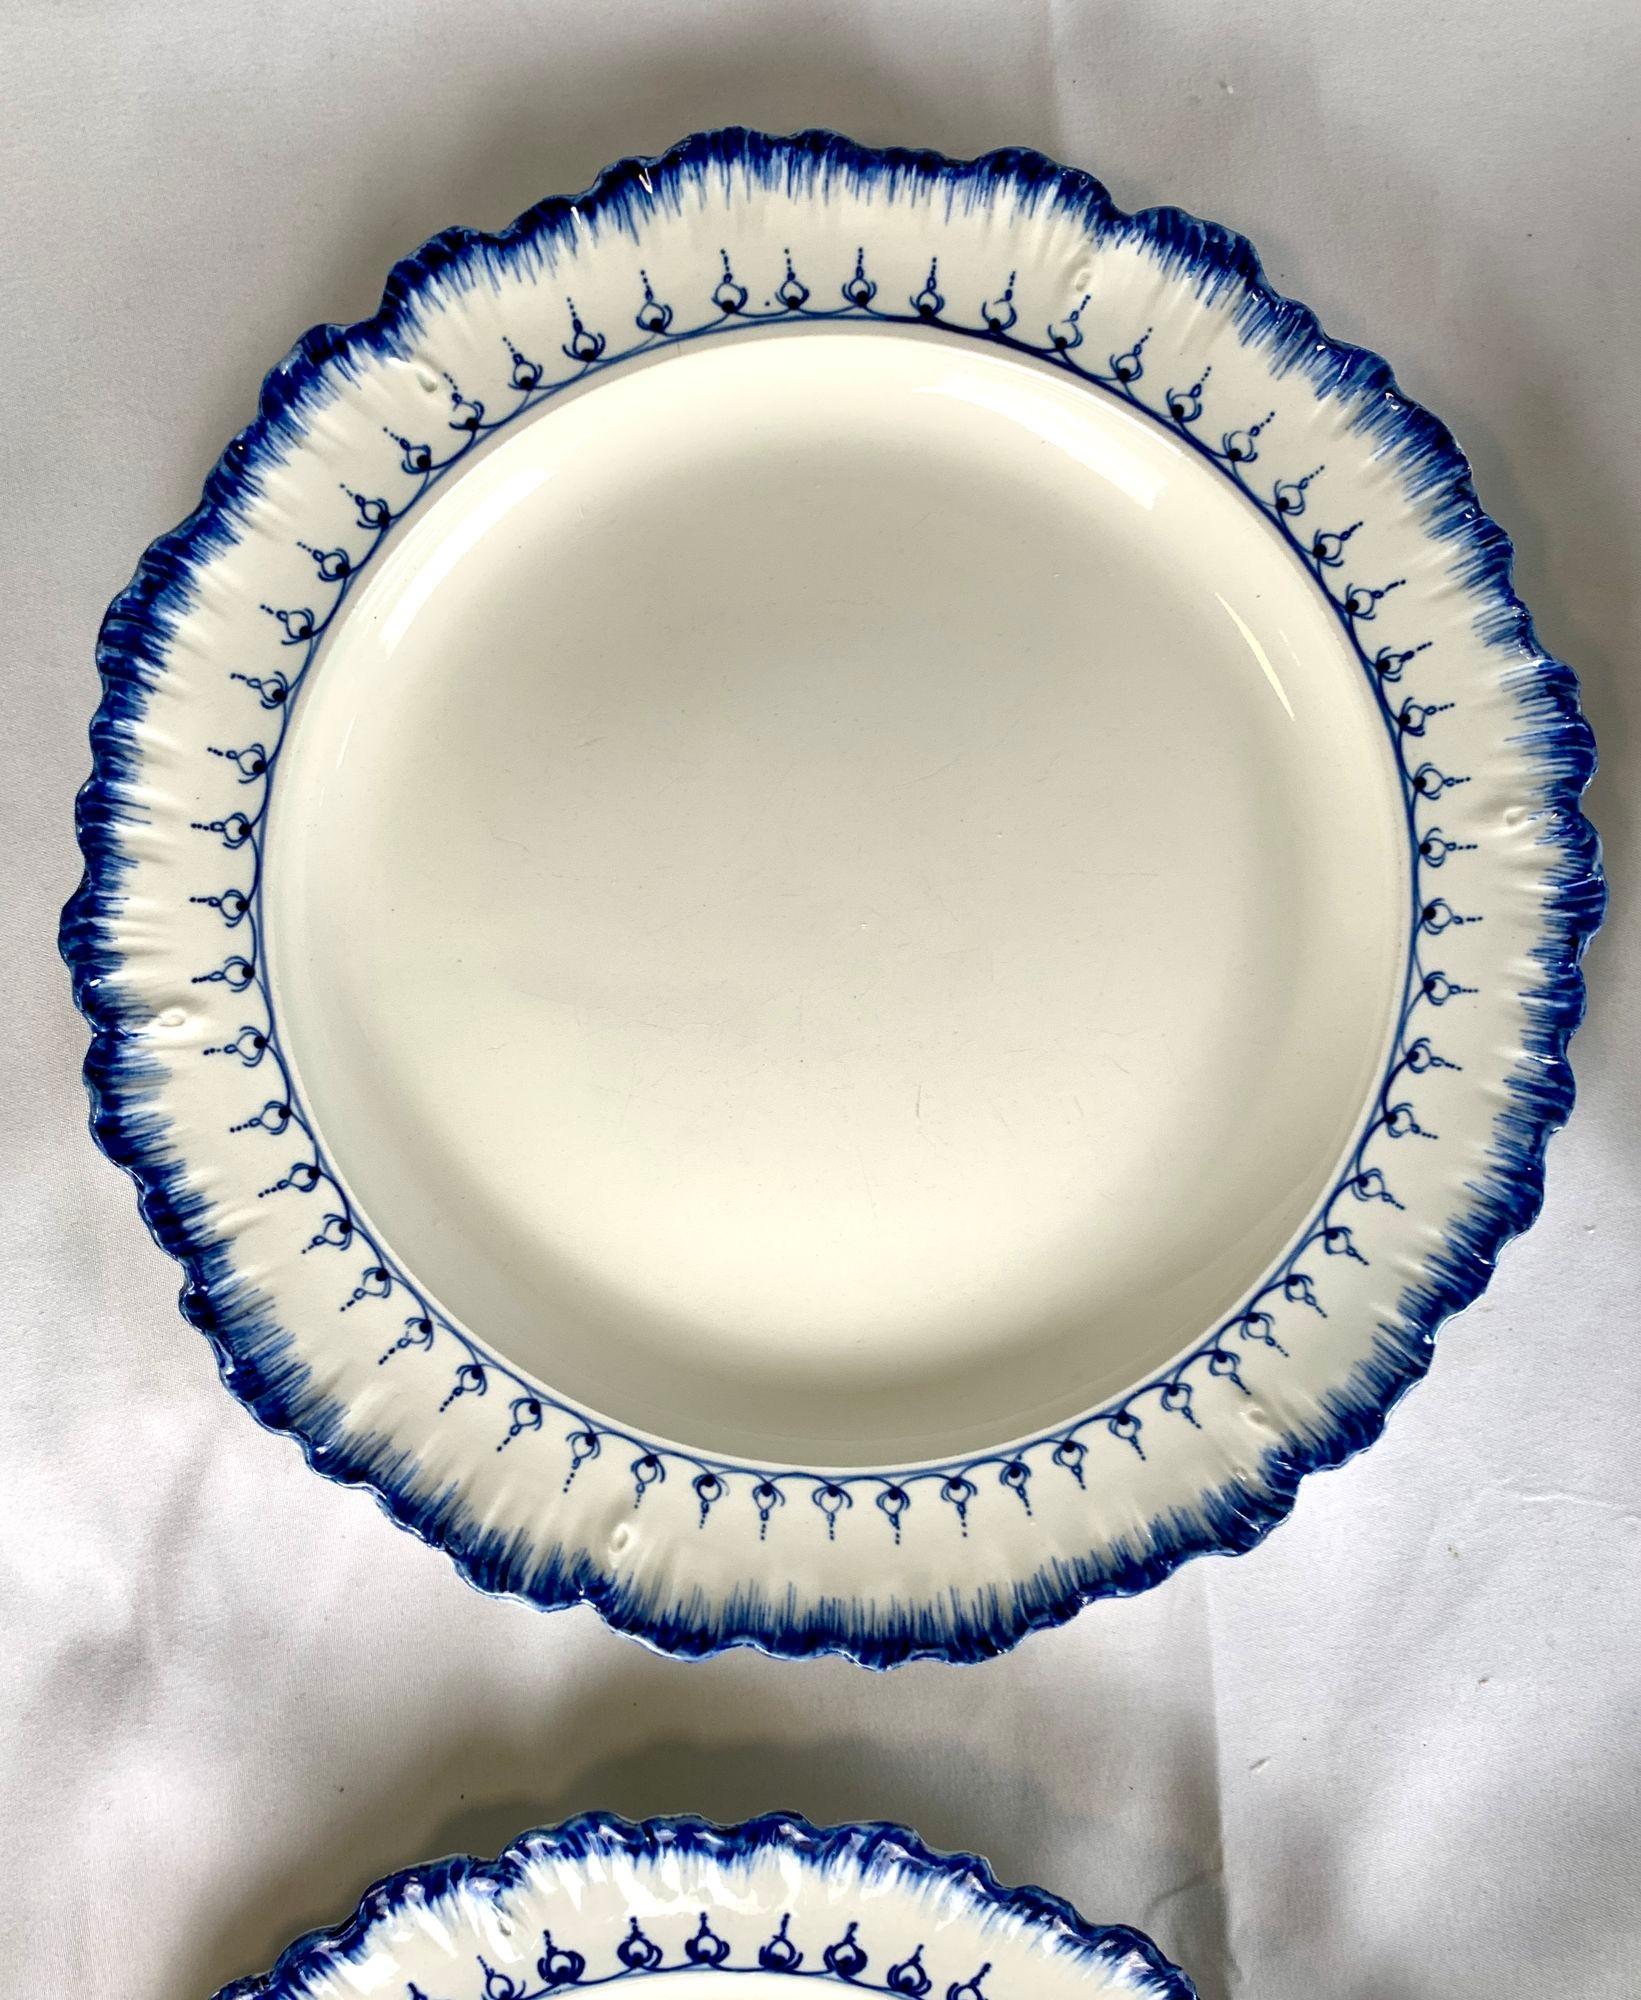 English Set Eight Wedgwood Dinner Plates Mared Pattern Made England Circa 1840 For Sale